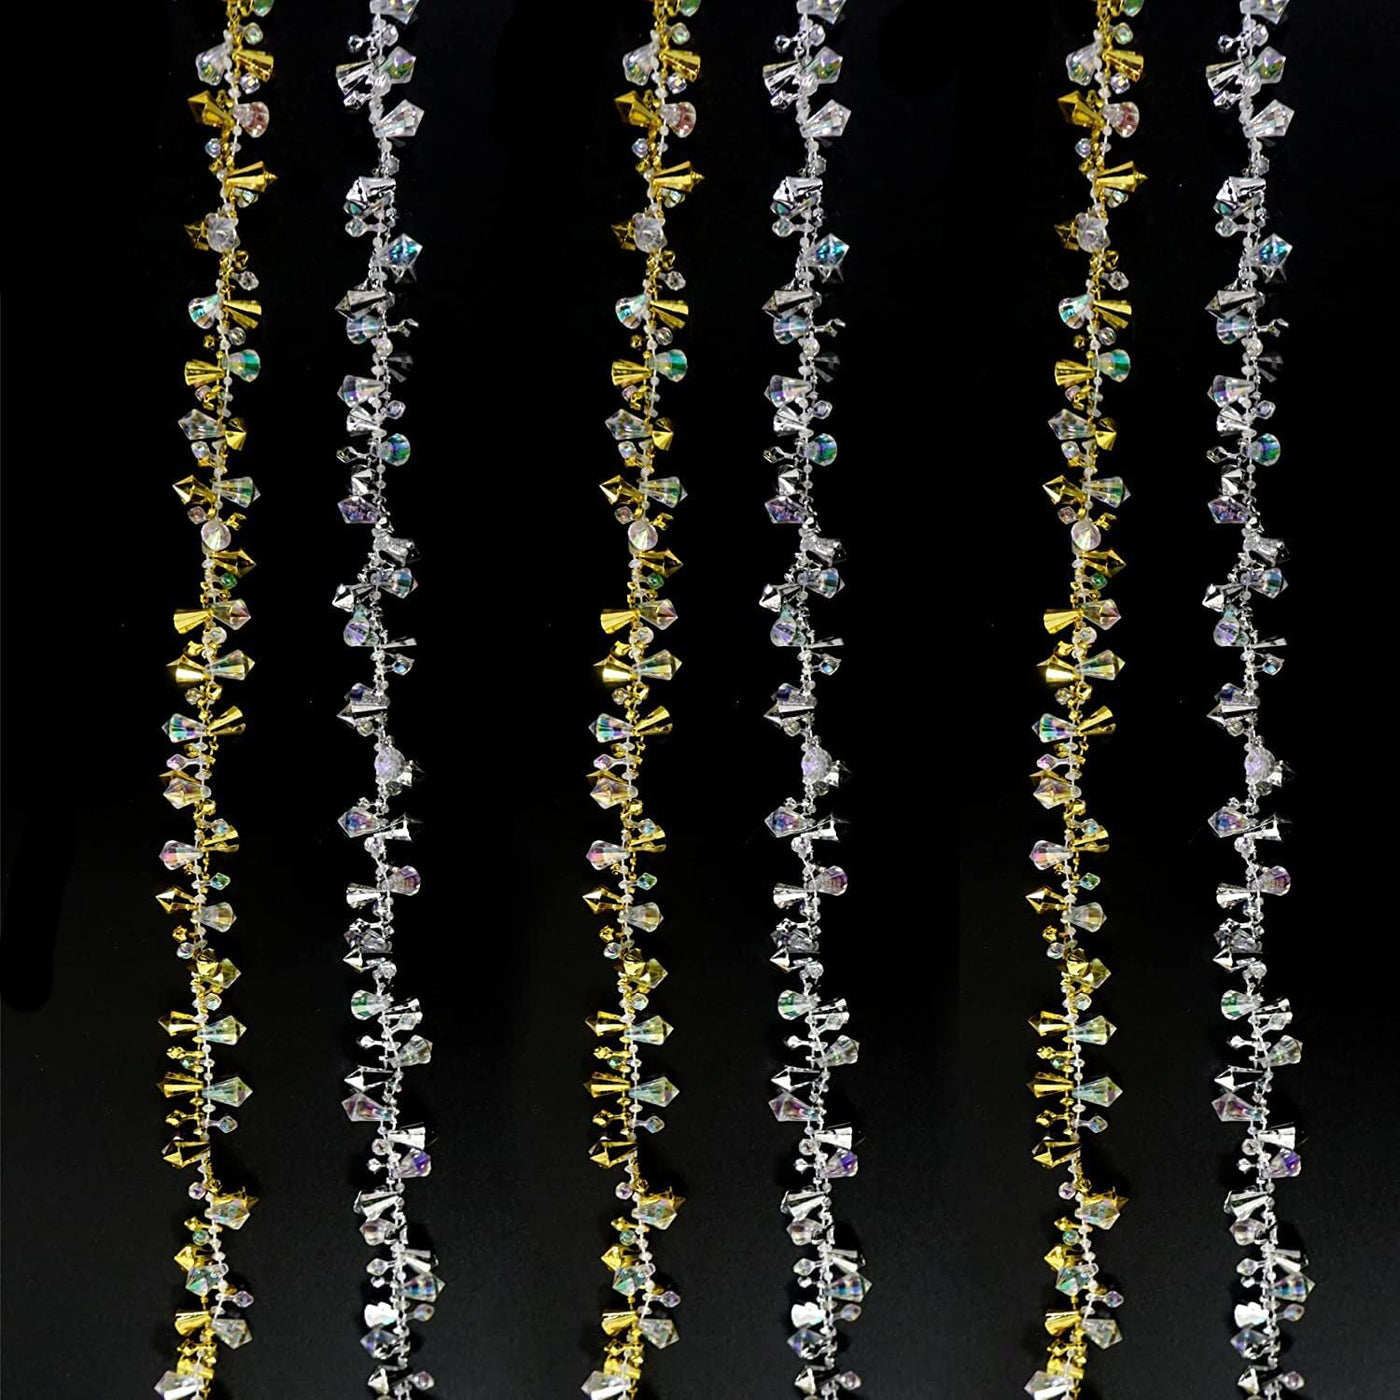 Crystal Beaded Christmas Tree Garland - Set of 4 Gold & Silver - 40 Ft Long, Each 10 ft Long, Acrylic Twist Bead String Garland Decorations by 4E's Novelty